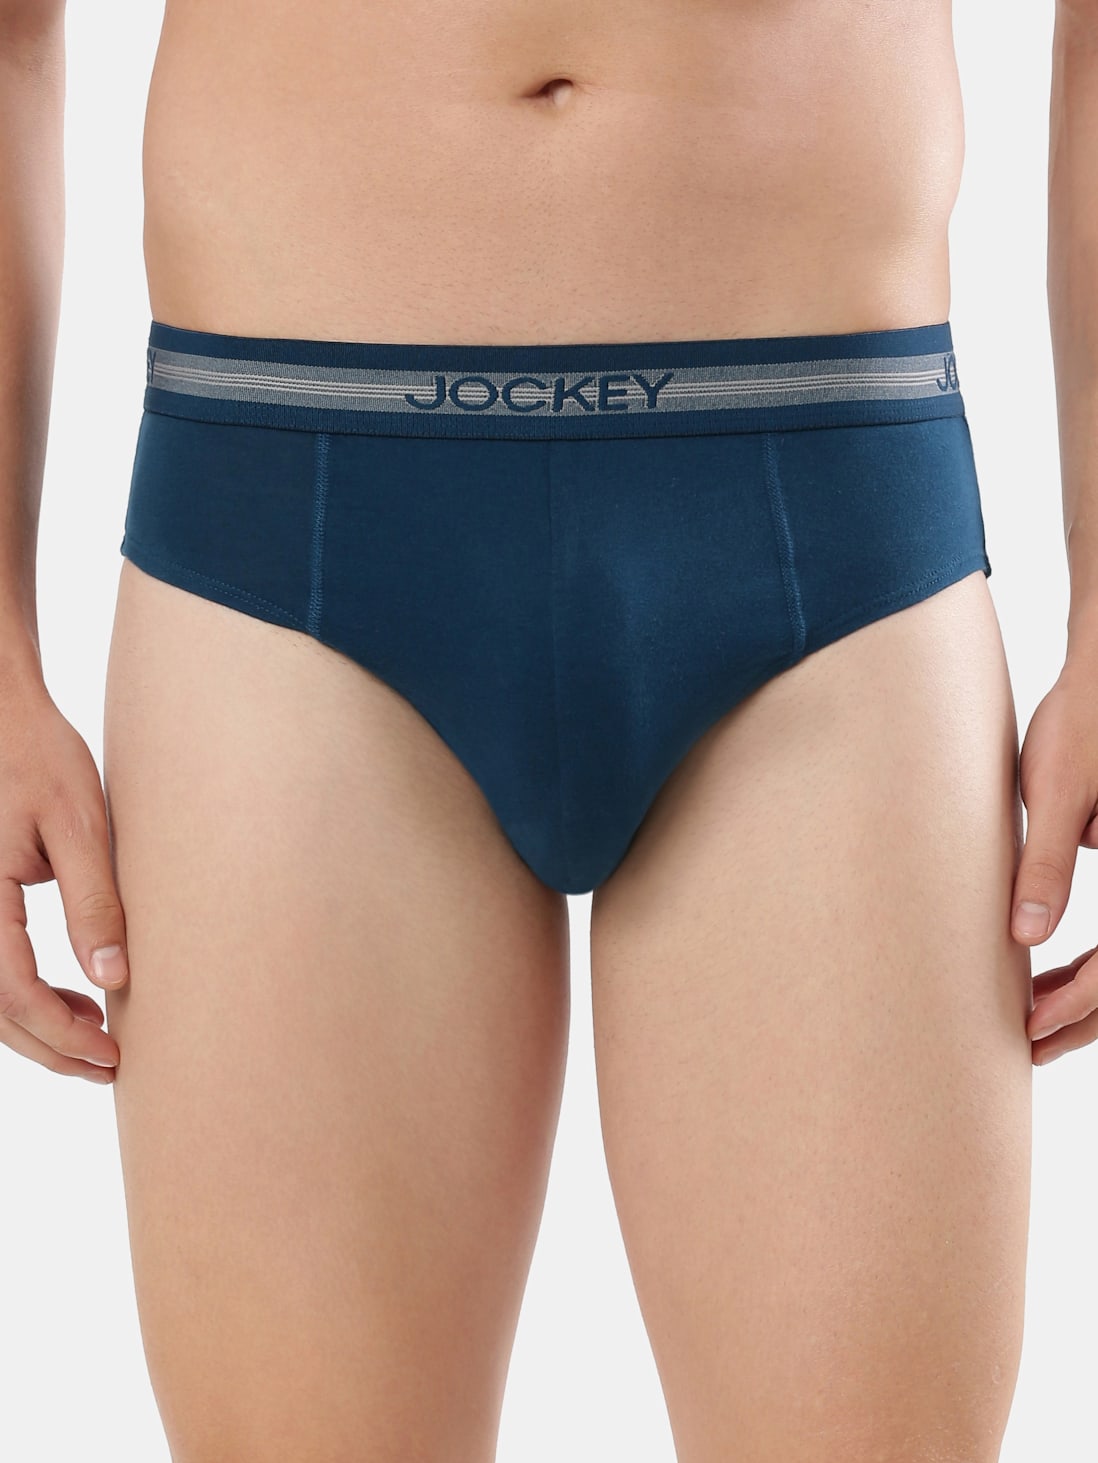 Jockey Men's Super Combed Cotton Solid Brief with Stay Fresh Properties - Elance 1010 Assorted Pack Of 2 - ShopIMO